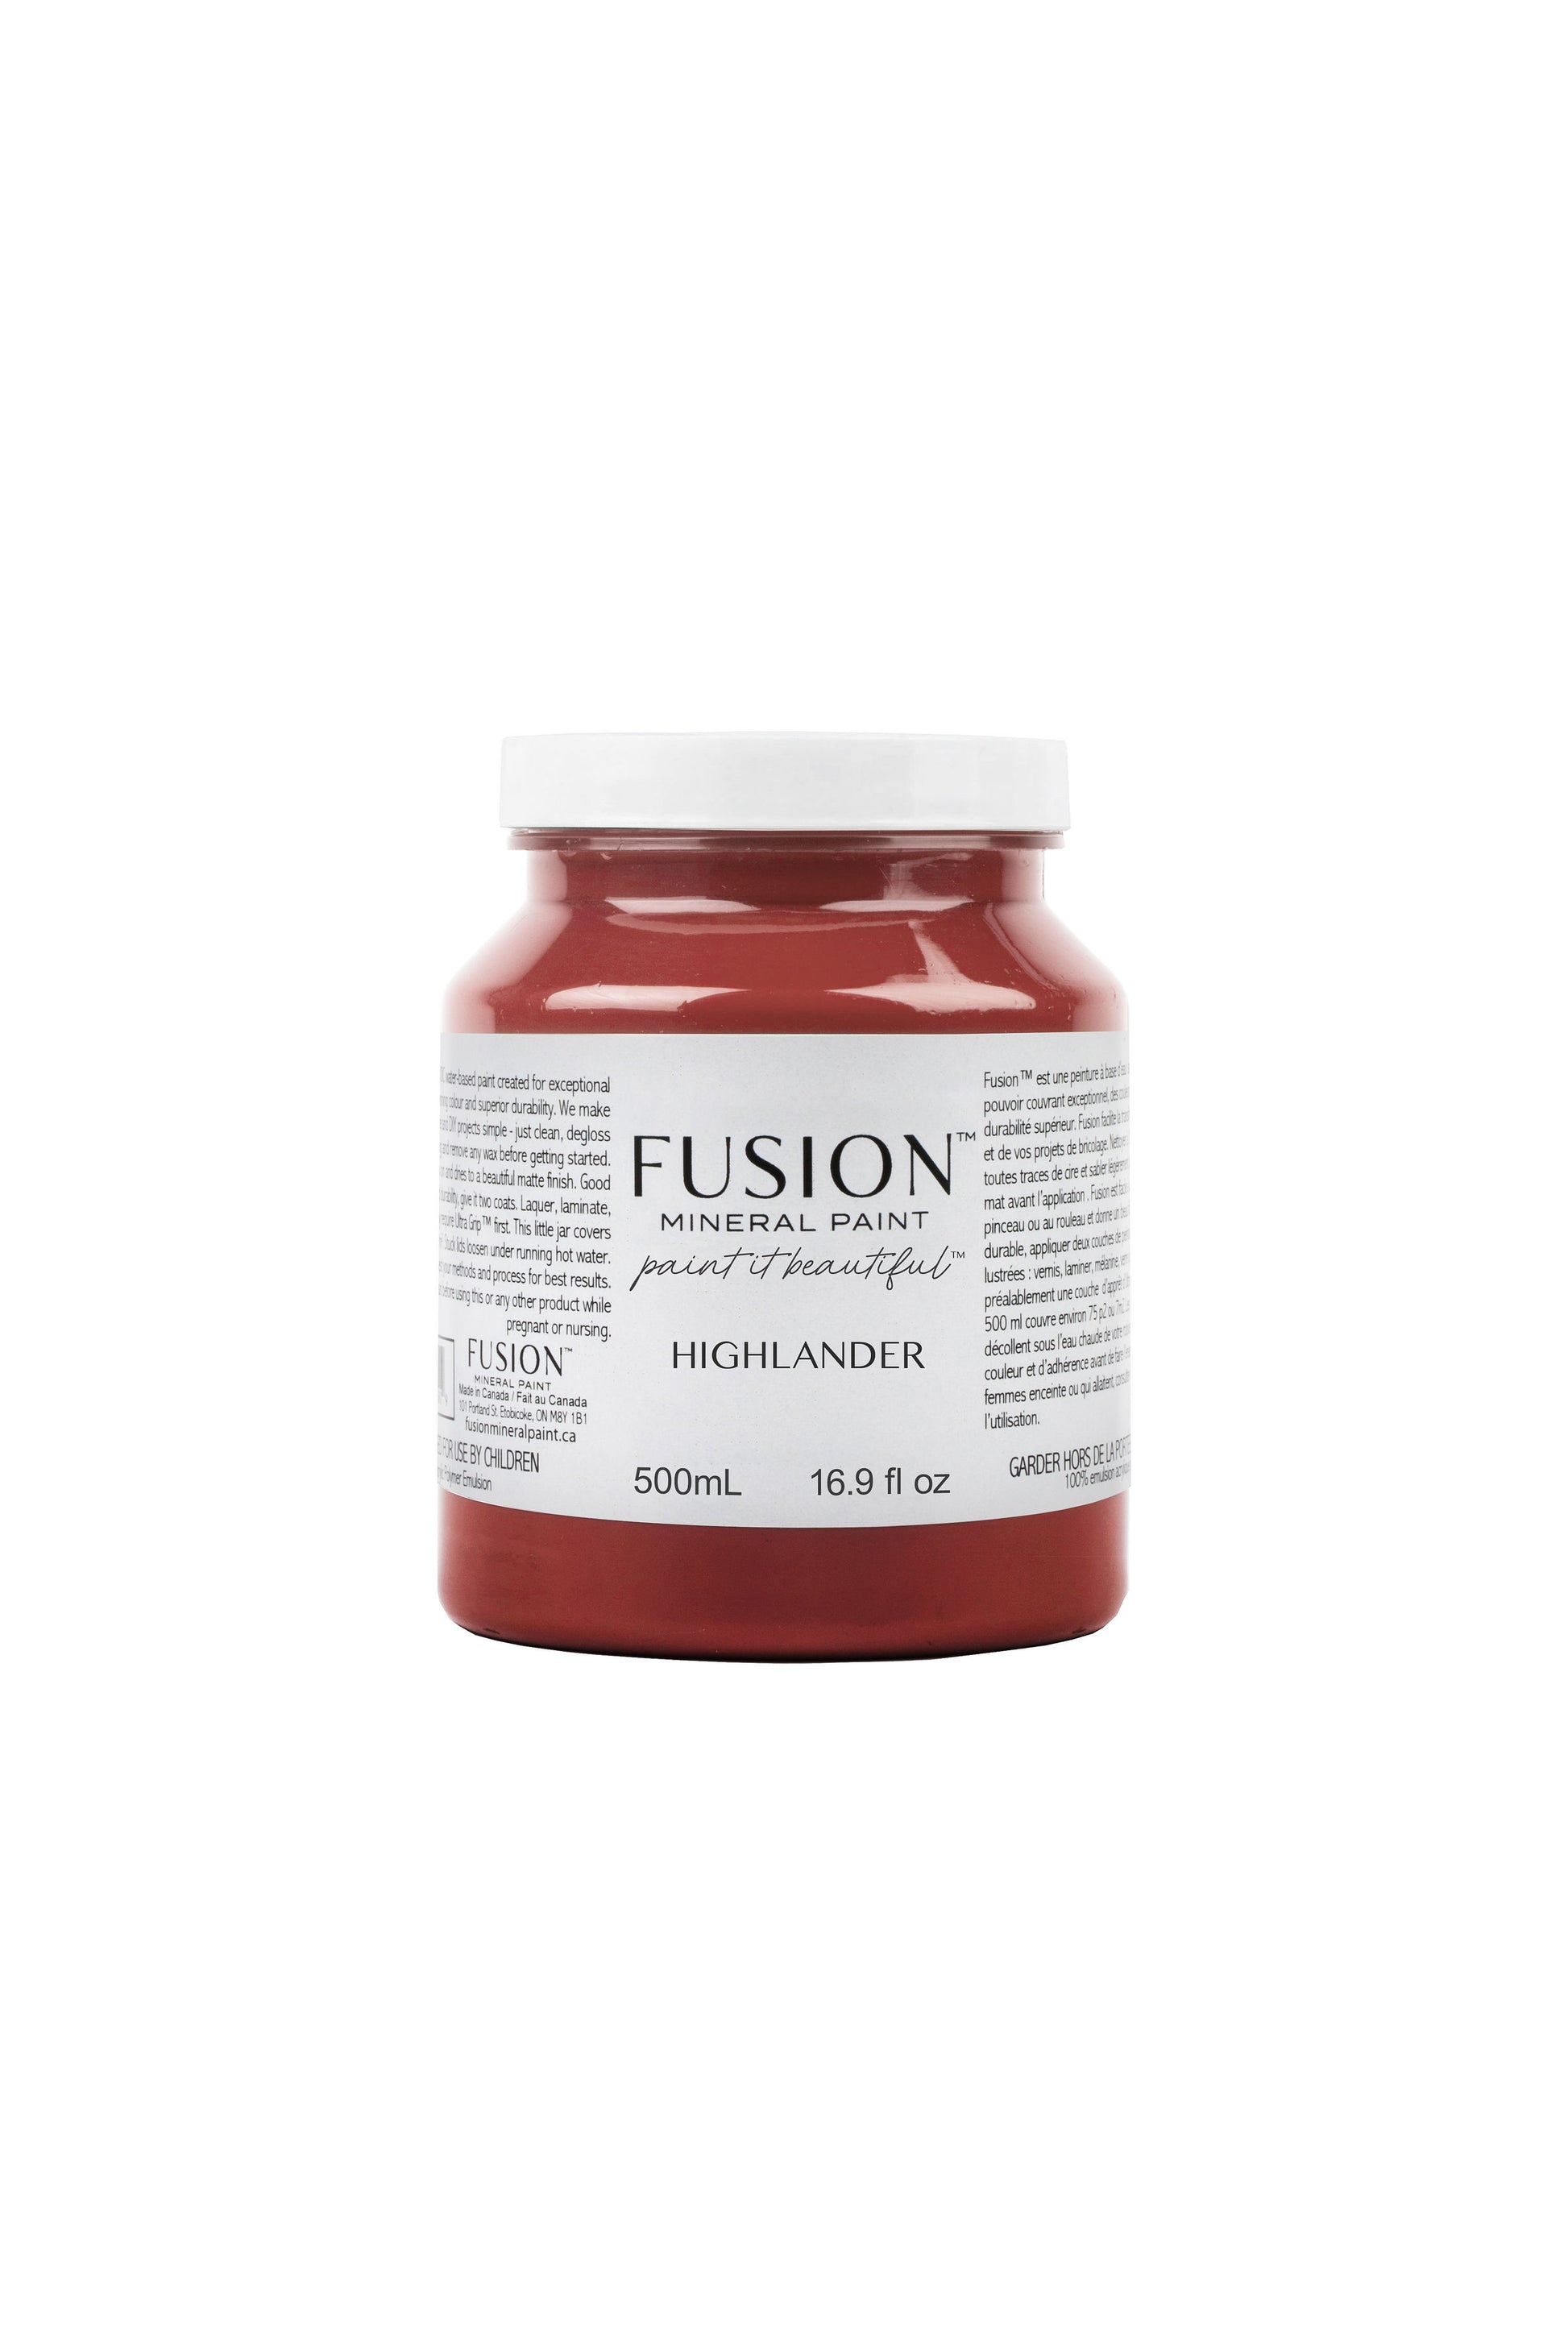 Highlander Fusion Mineral Paint | 500ml Pint Size